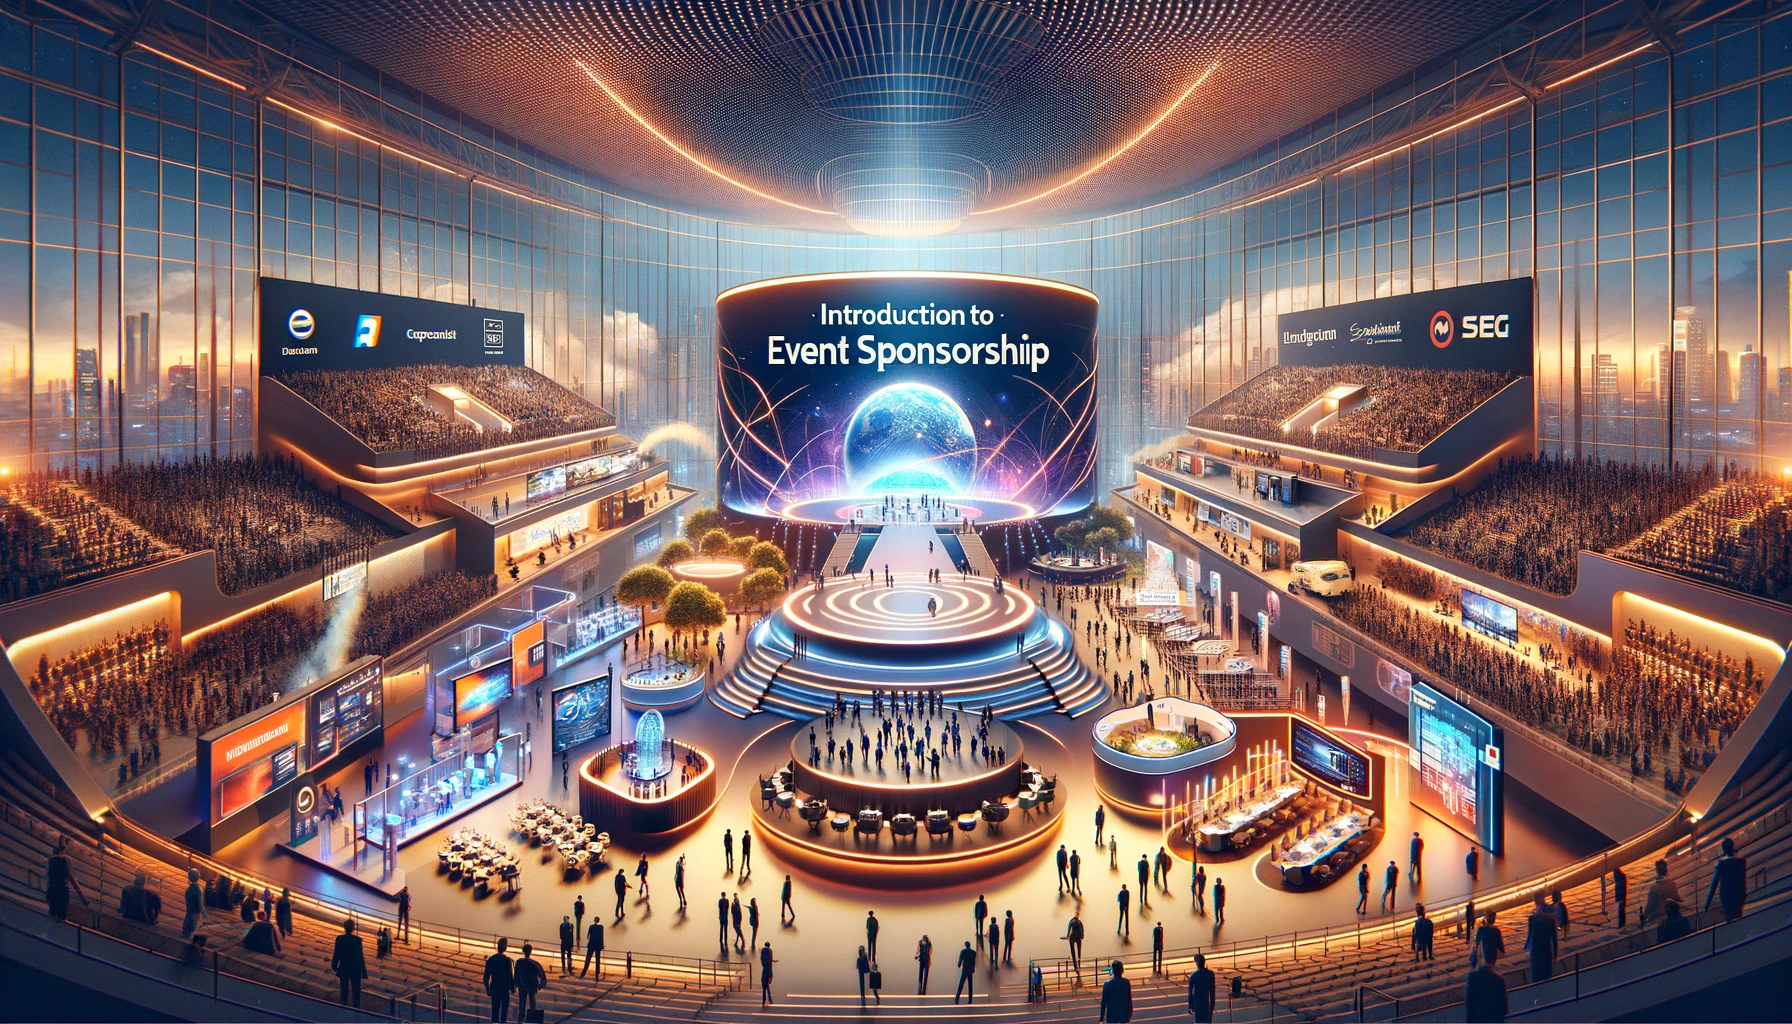 Selling Event Sponsorship: A Step-by-Step Guide to Creating an Irresistible Sponsorship Deck